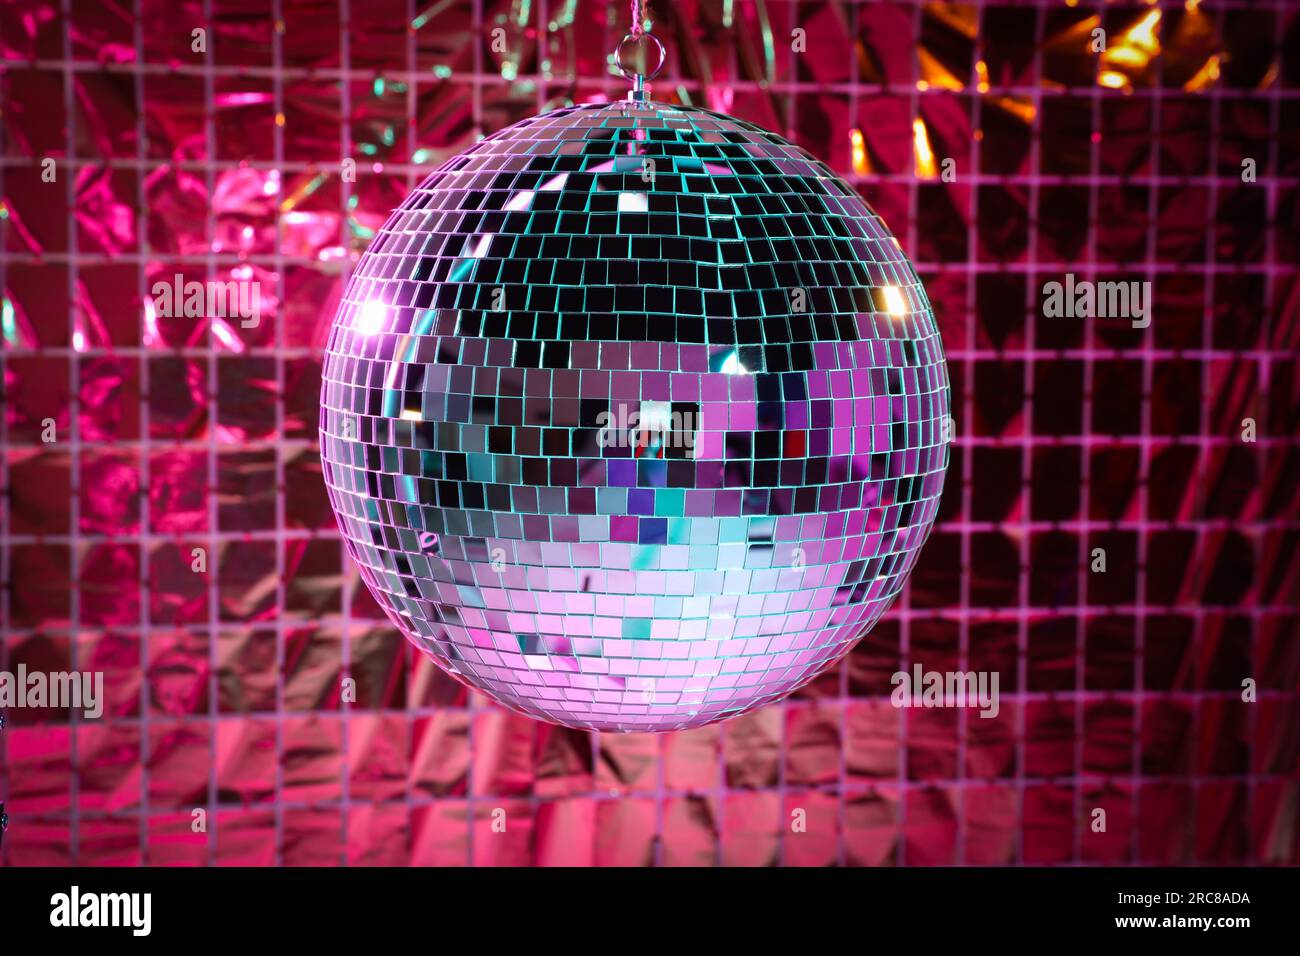 pink disco ball - Google Images  Disco ball, Everything pink, Pretty in  pink